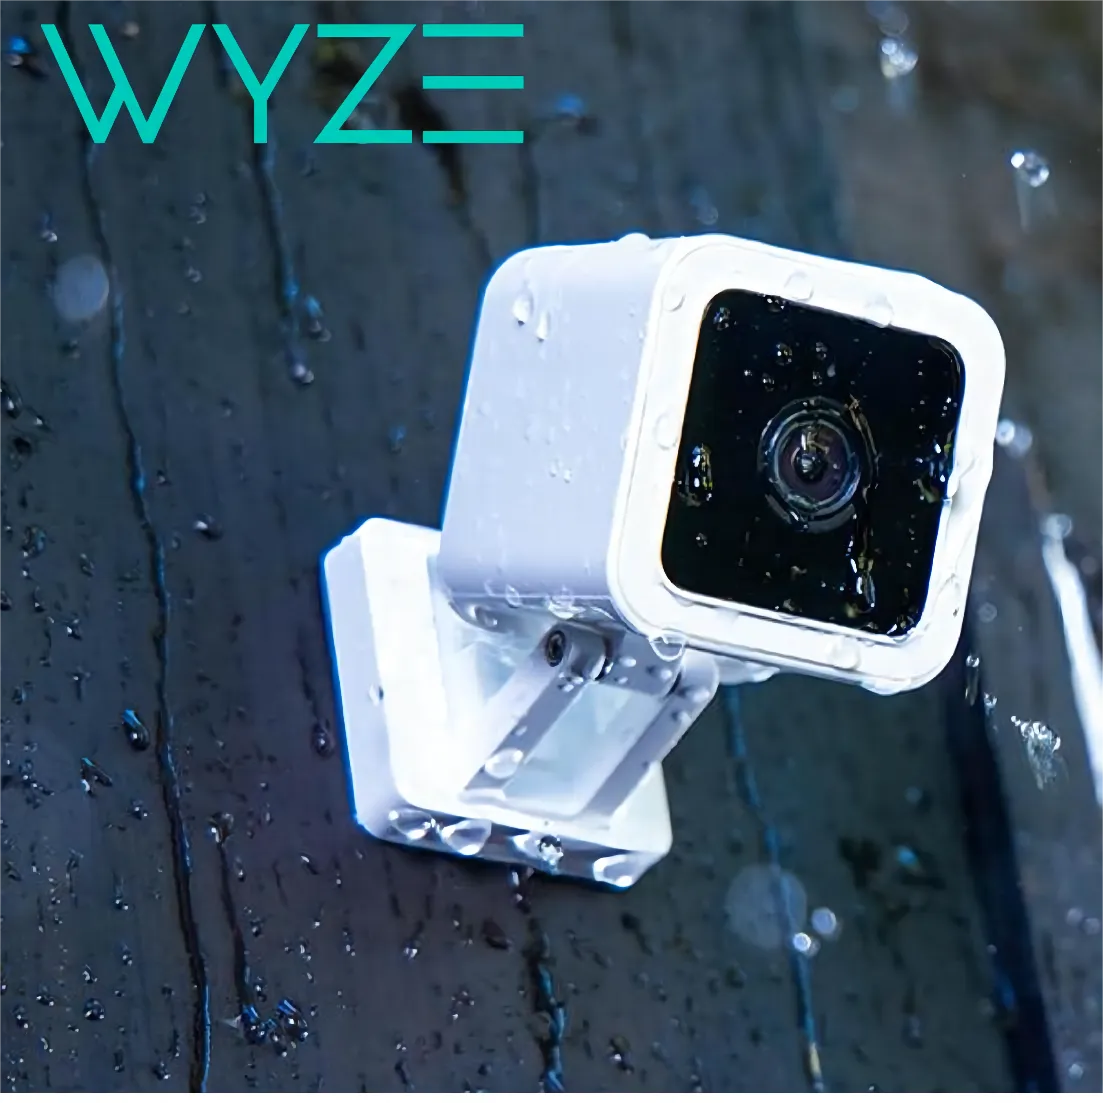 Wyze Cam v3 with Color Night Vision, Wireless 1080p HD Indoor/Outdoor Video Camera